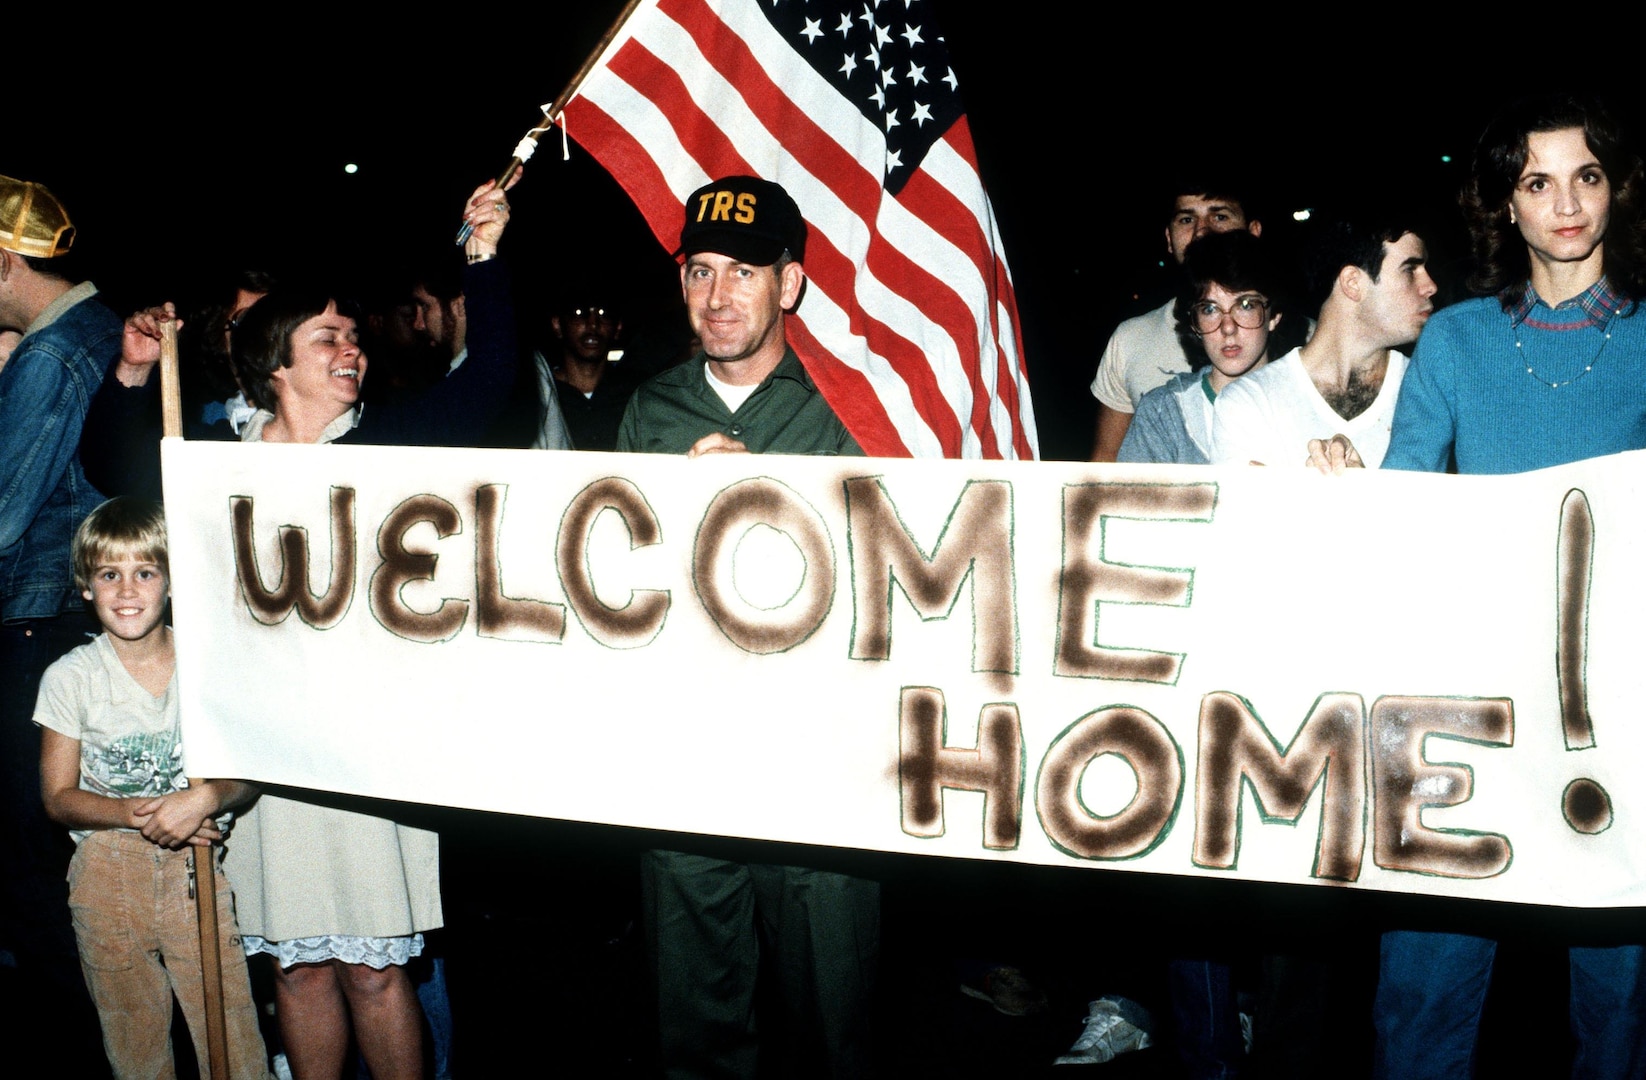 Friends and family hold up a “Welcome Home” sign for the American medical students arriving at Charleston Air Force Base Nov. 3, 1983, after being rescued in Grenada by U.S. forces. 